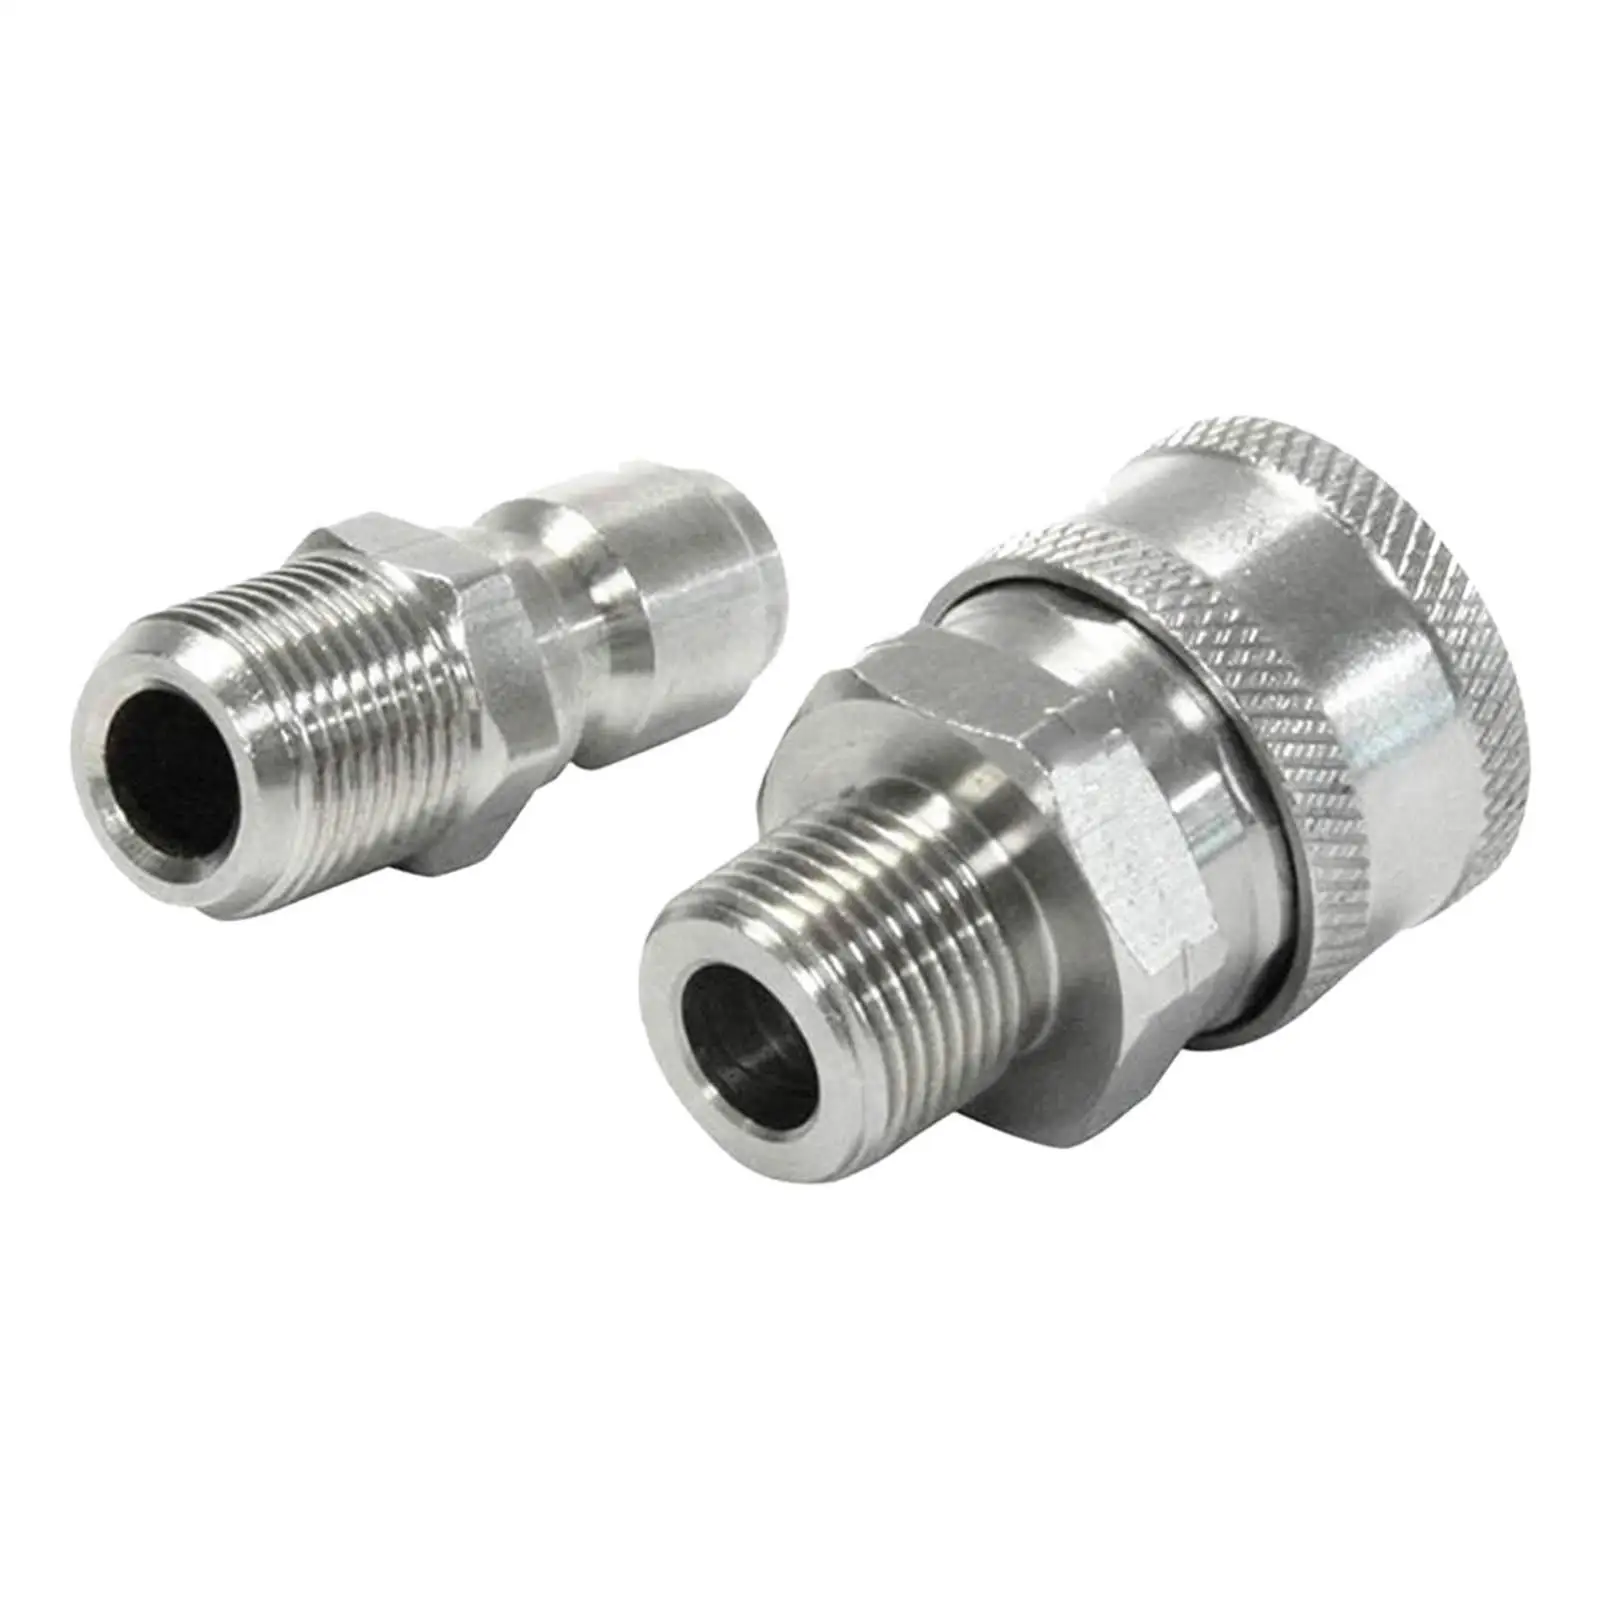 2 Pieces Pressure Washer Adapter Set 3/8 inch Hose for Hot and Cold Water Surface Cleaner